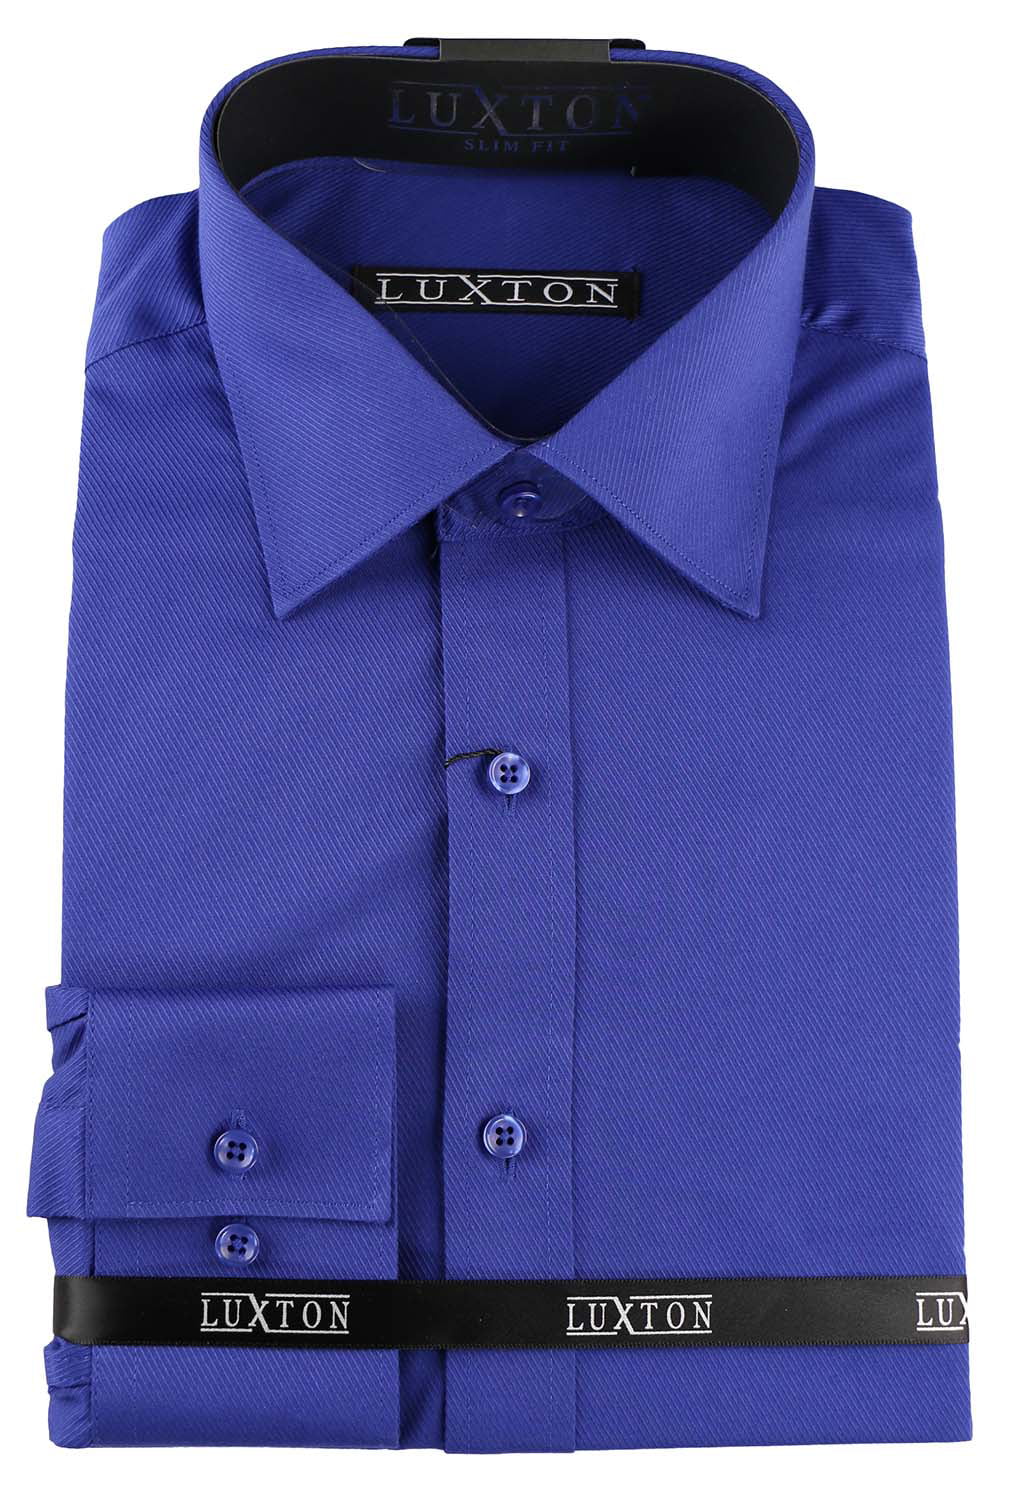 Available in More Colors Luxton Men’s Regular Fit Long Sleeve Cotton Poly Dress Shirt